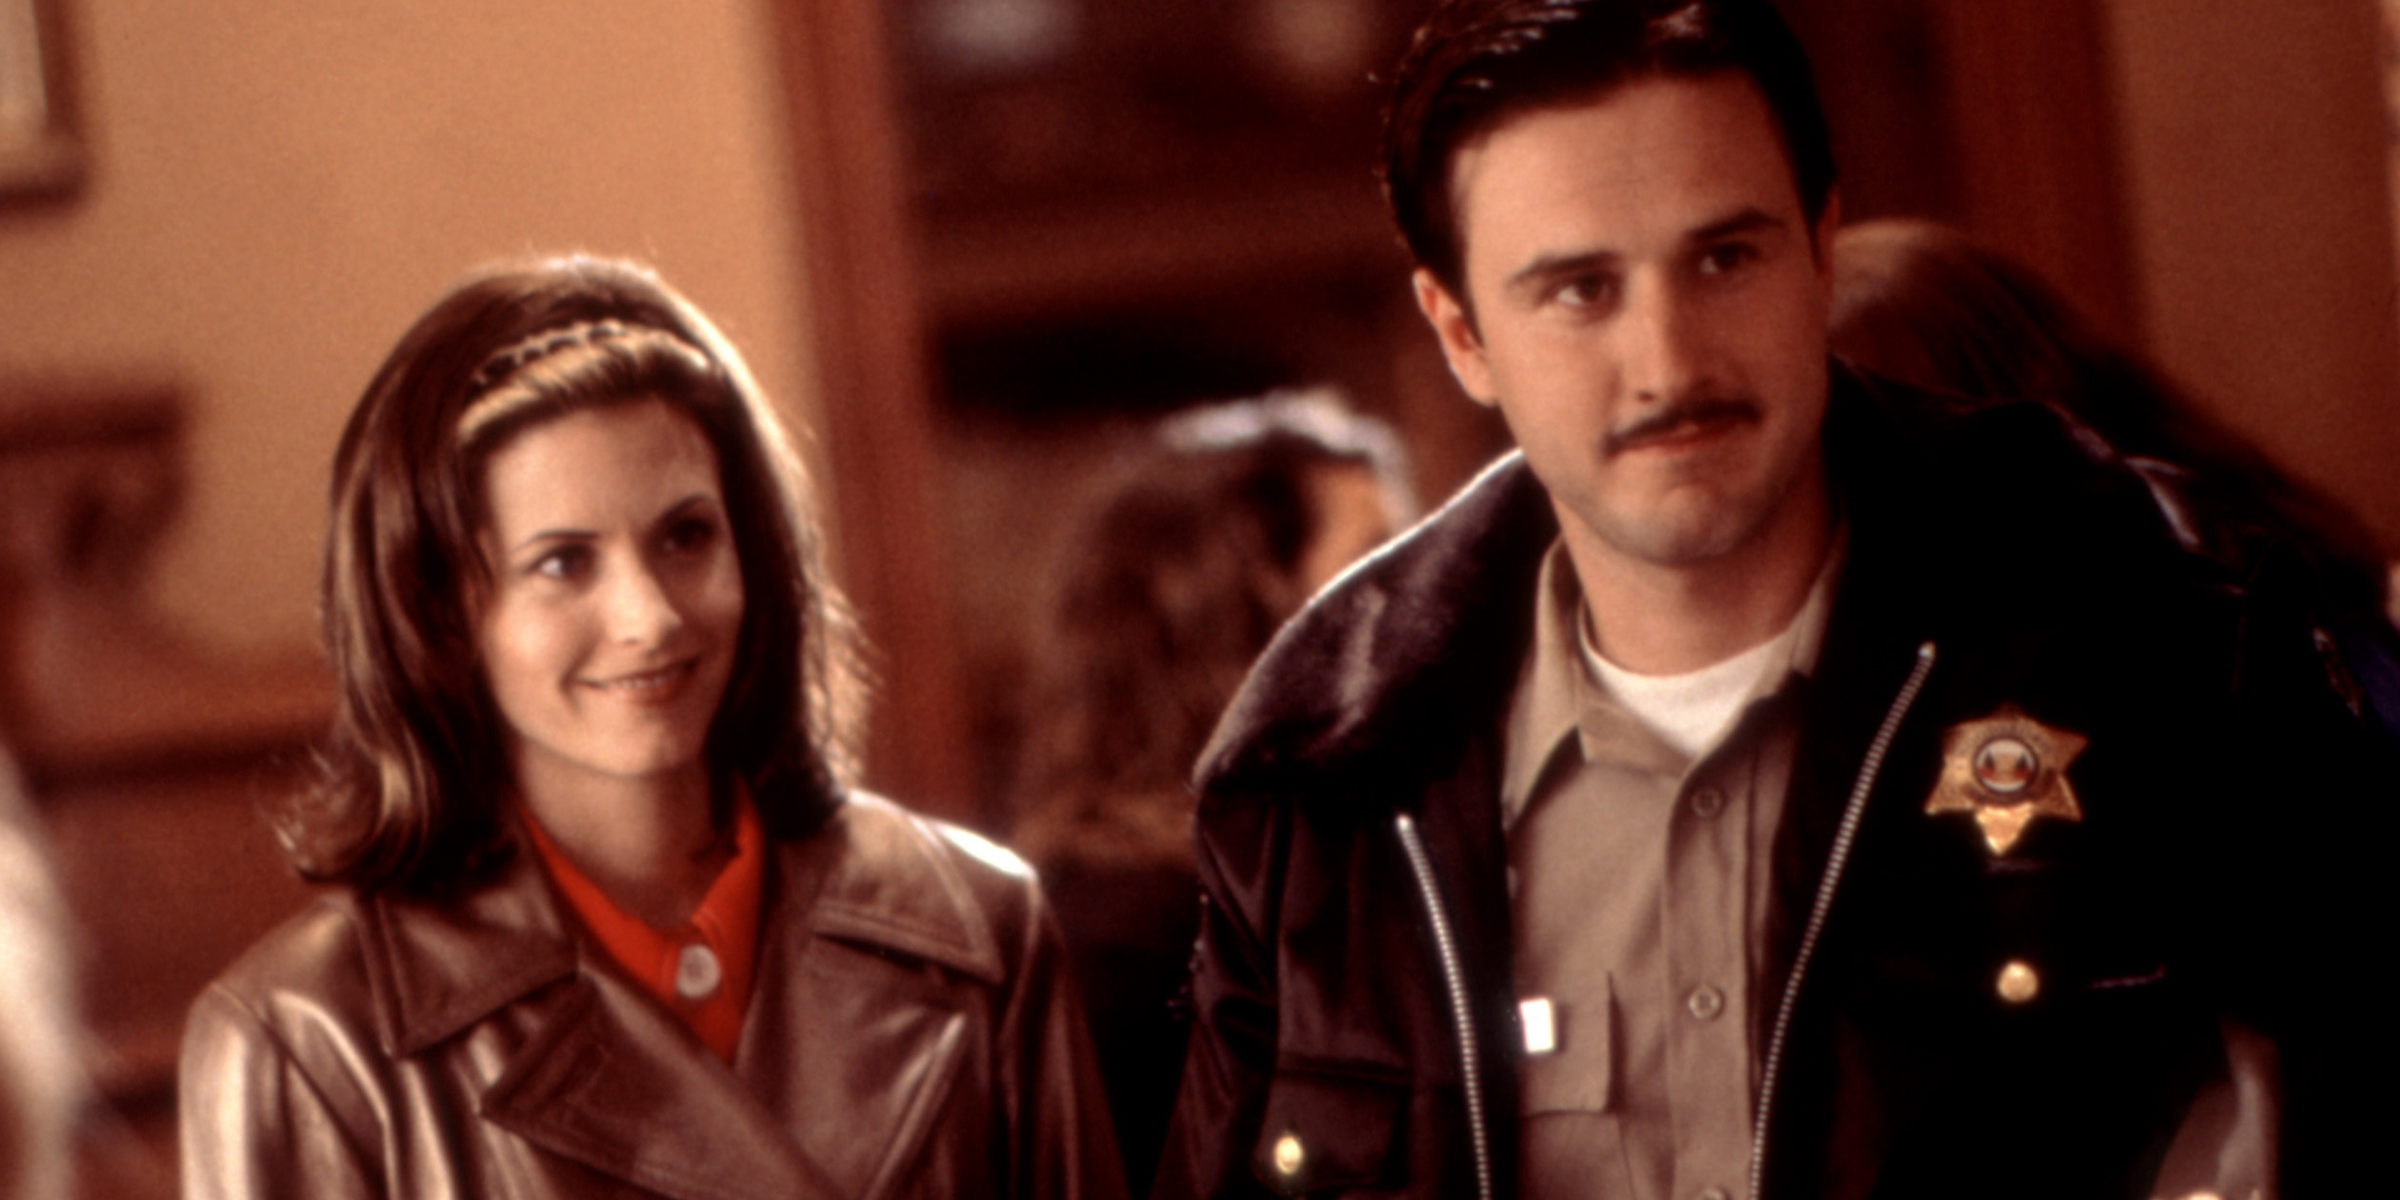 Are Courteney Cox and David Arquette Still Together? Why Did They Divorce?